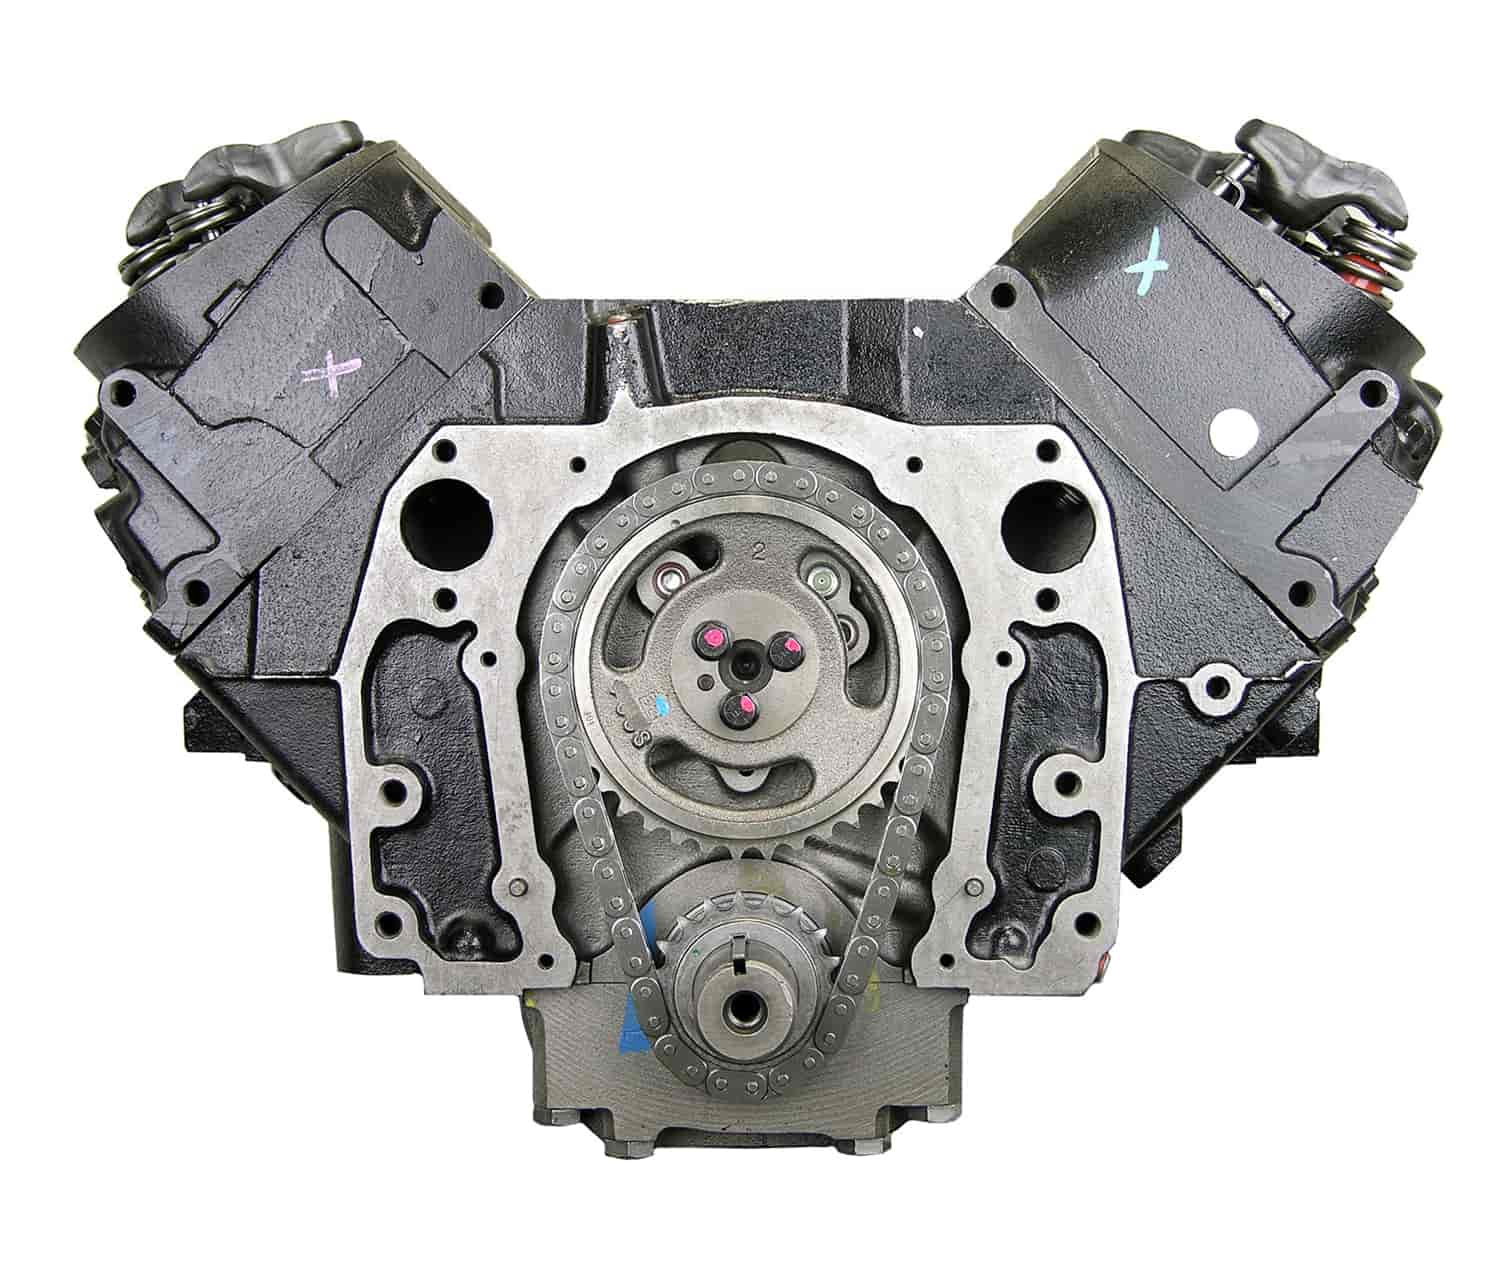 Remanufactured Crate Engine for 1996-1998 Chevy/GMC Medium Duty